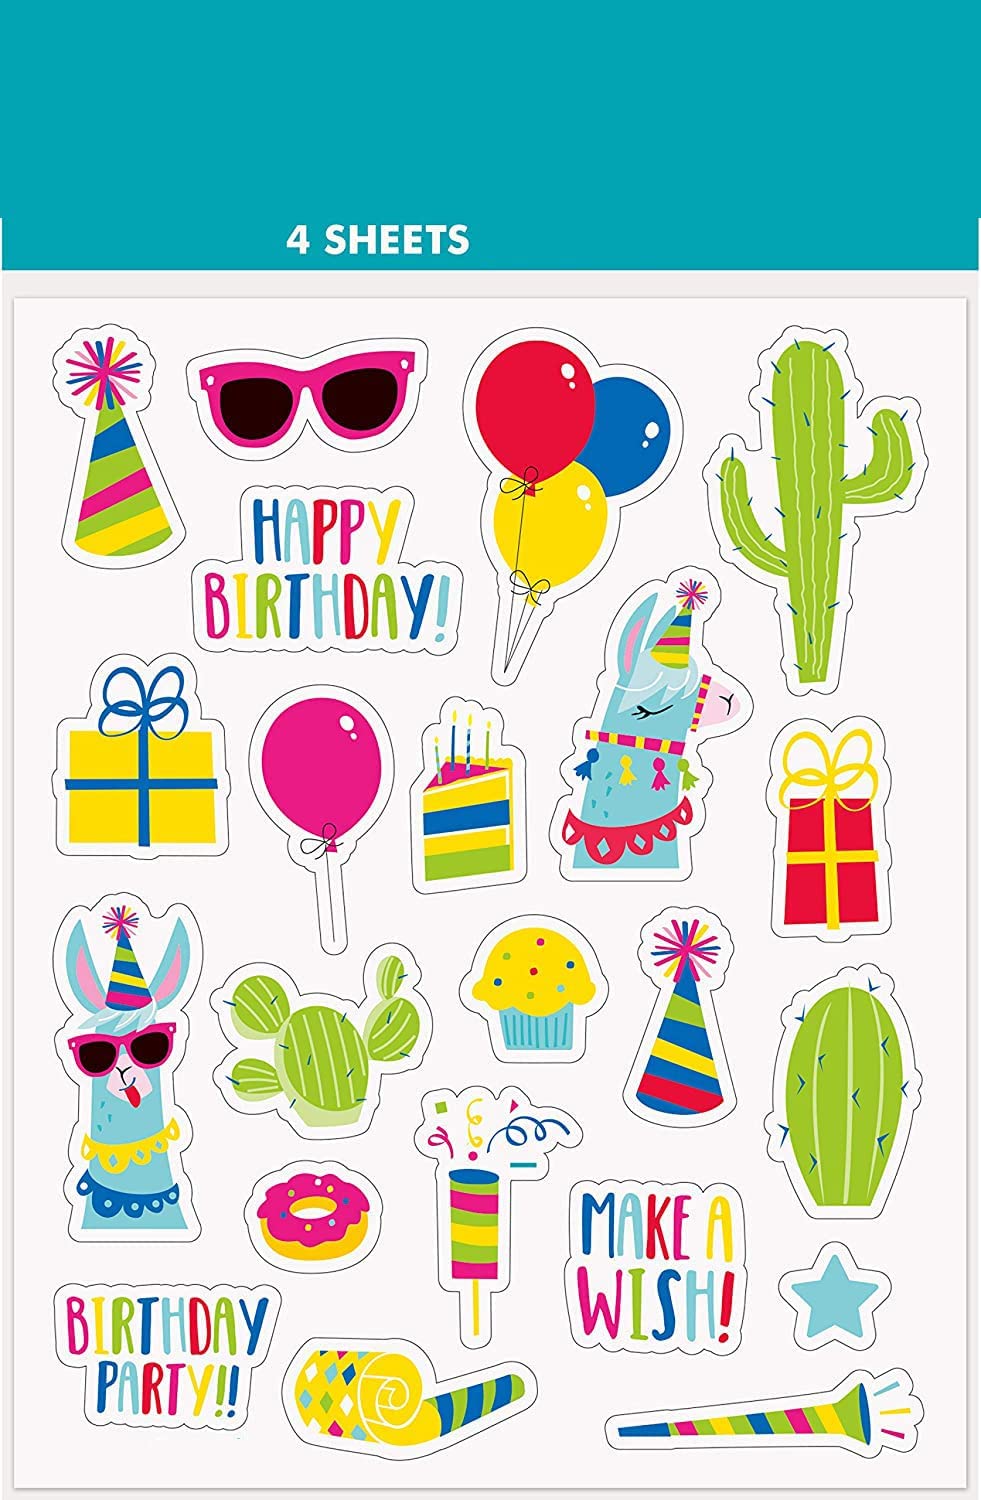 Birthday party stickers in different shapes